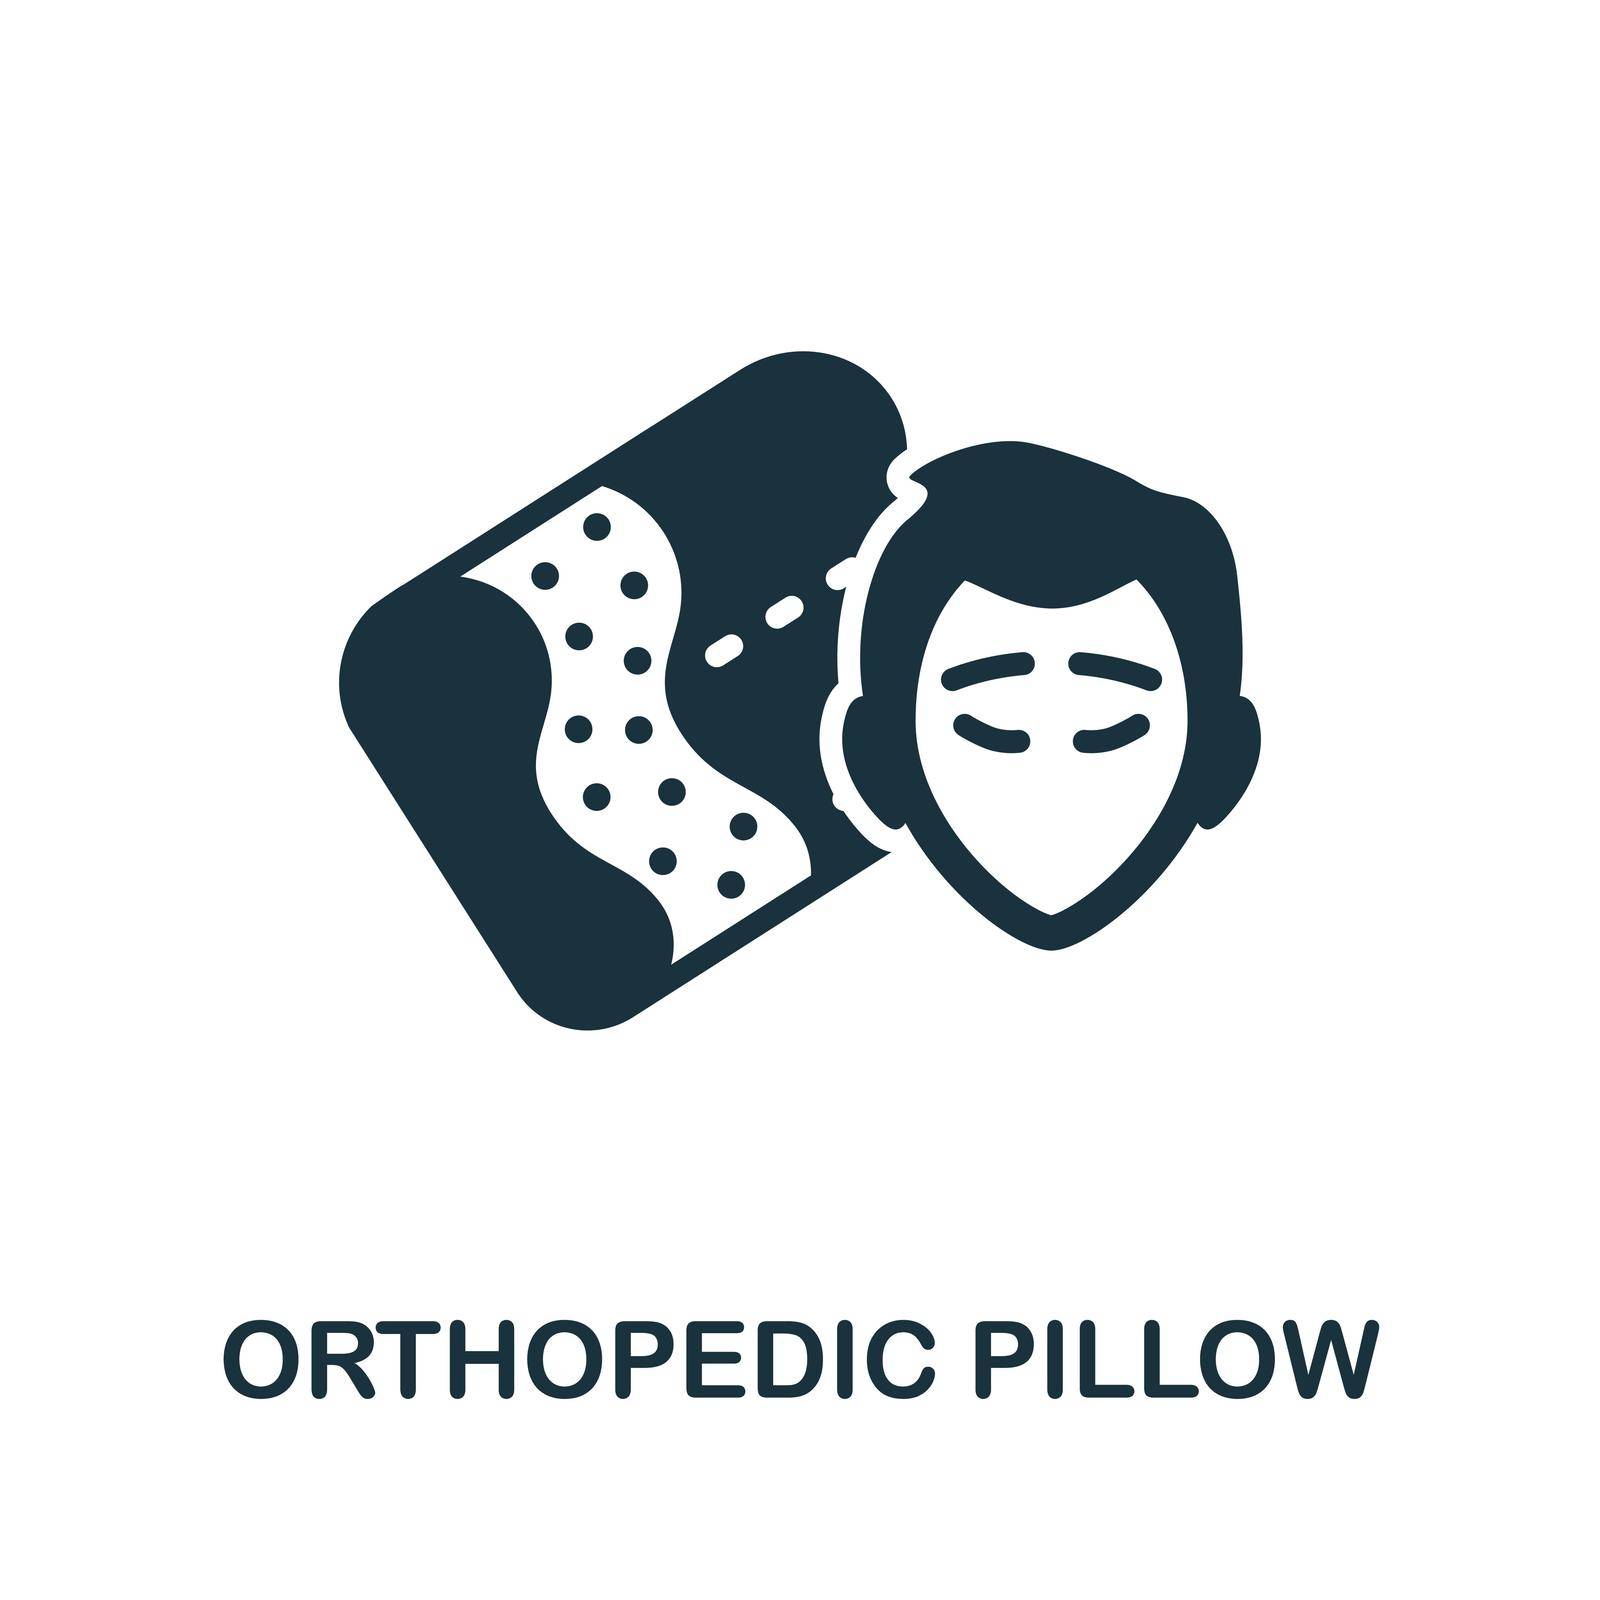 Orthopedic Pillow icon. Simple line element orthopedic pillow symbol for templates, web design and infographics.